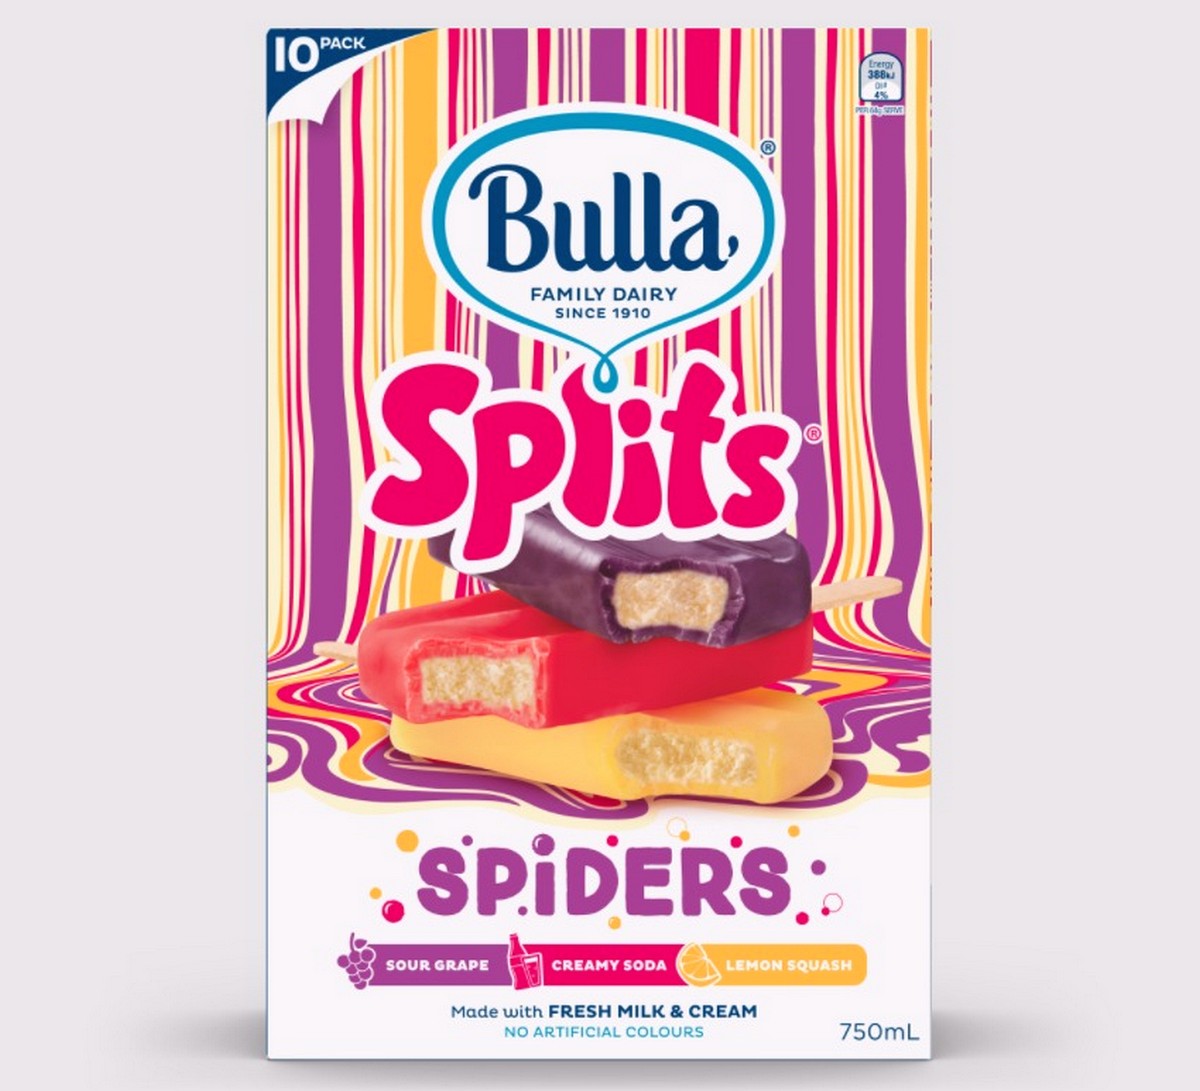 bulla_splits_spiders_10pk_2d-png-5000×5000- Today onwards: Bulla Buy 1 FREE 1 Summer Promotion at $12.90 ($25.80 U.P, 50% saving)! Available in all leading supermarkets in Singapore Now!